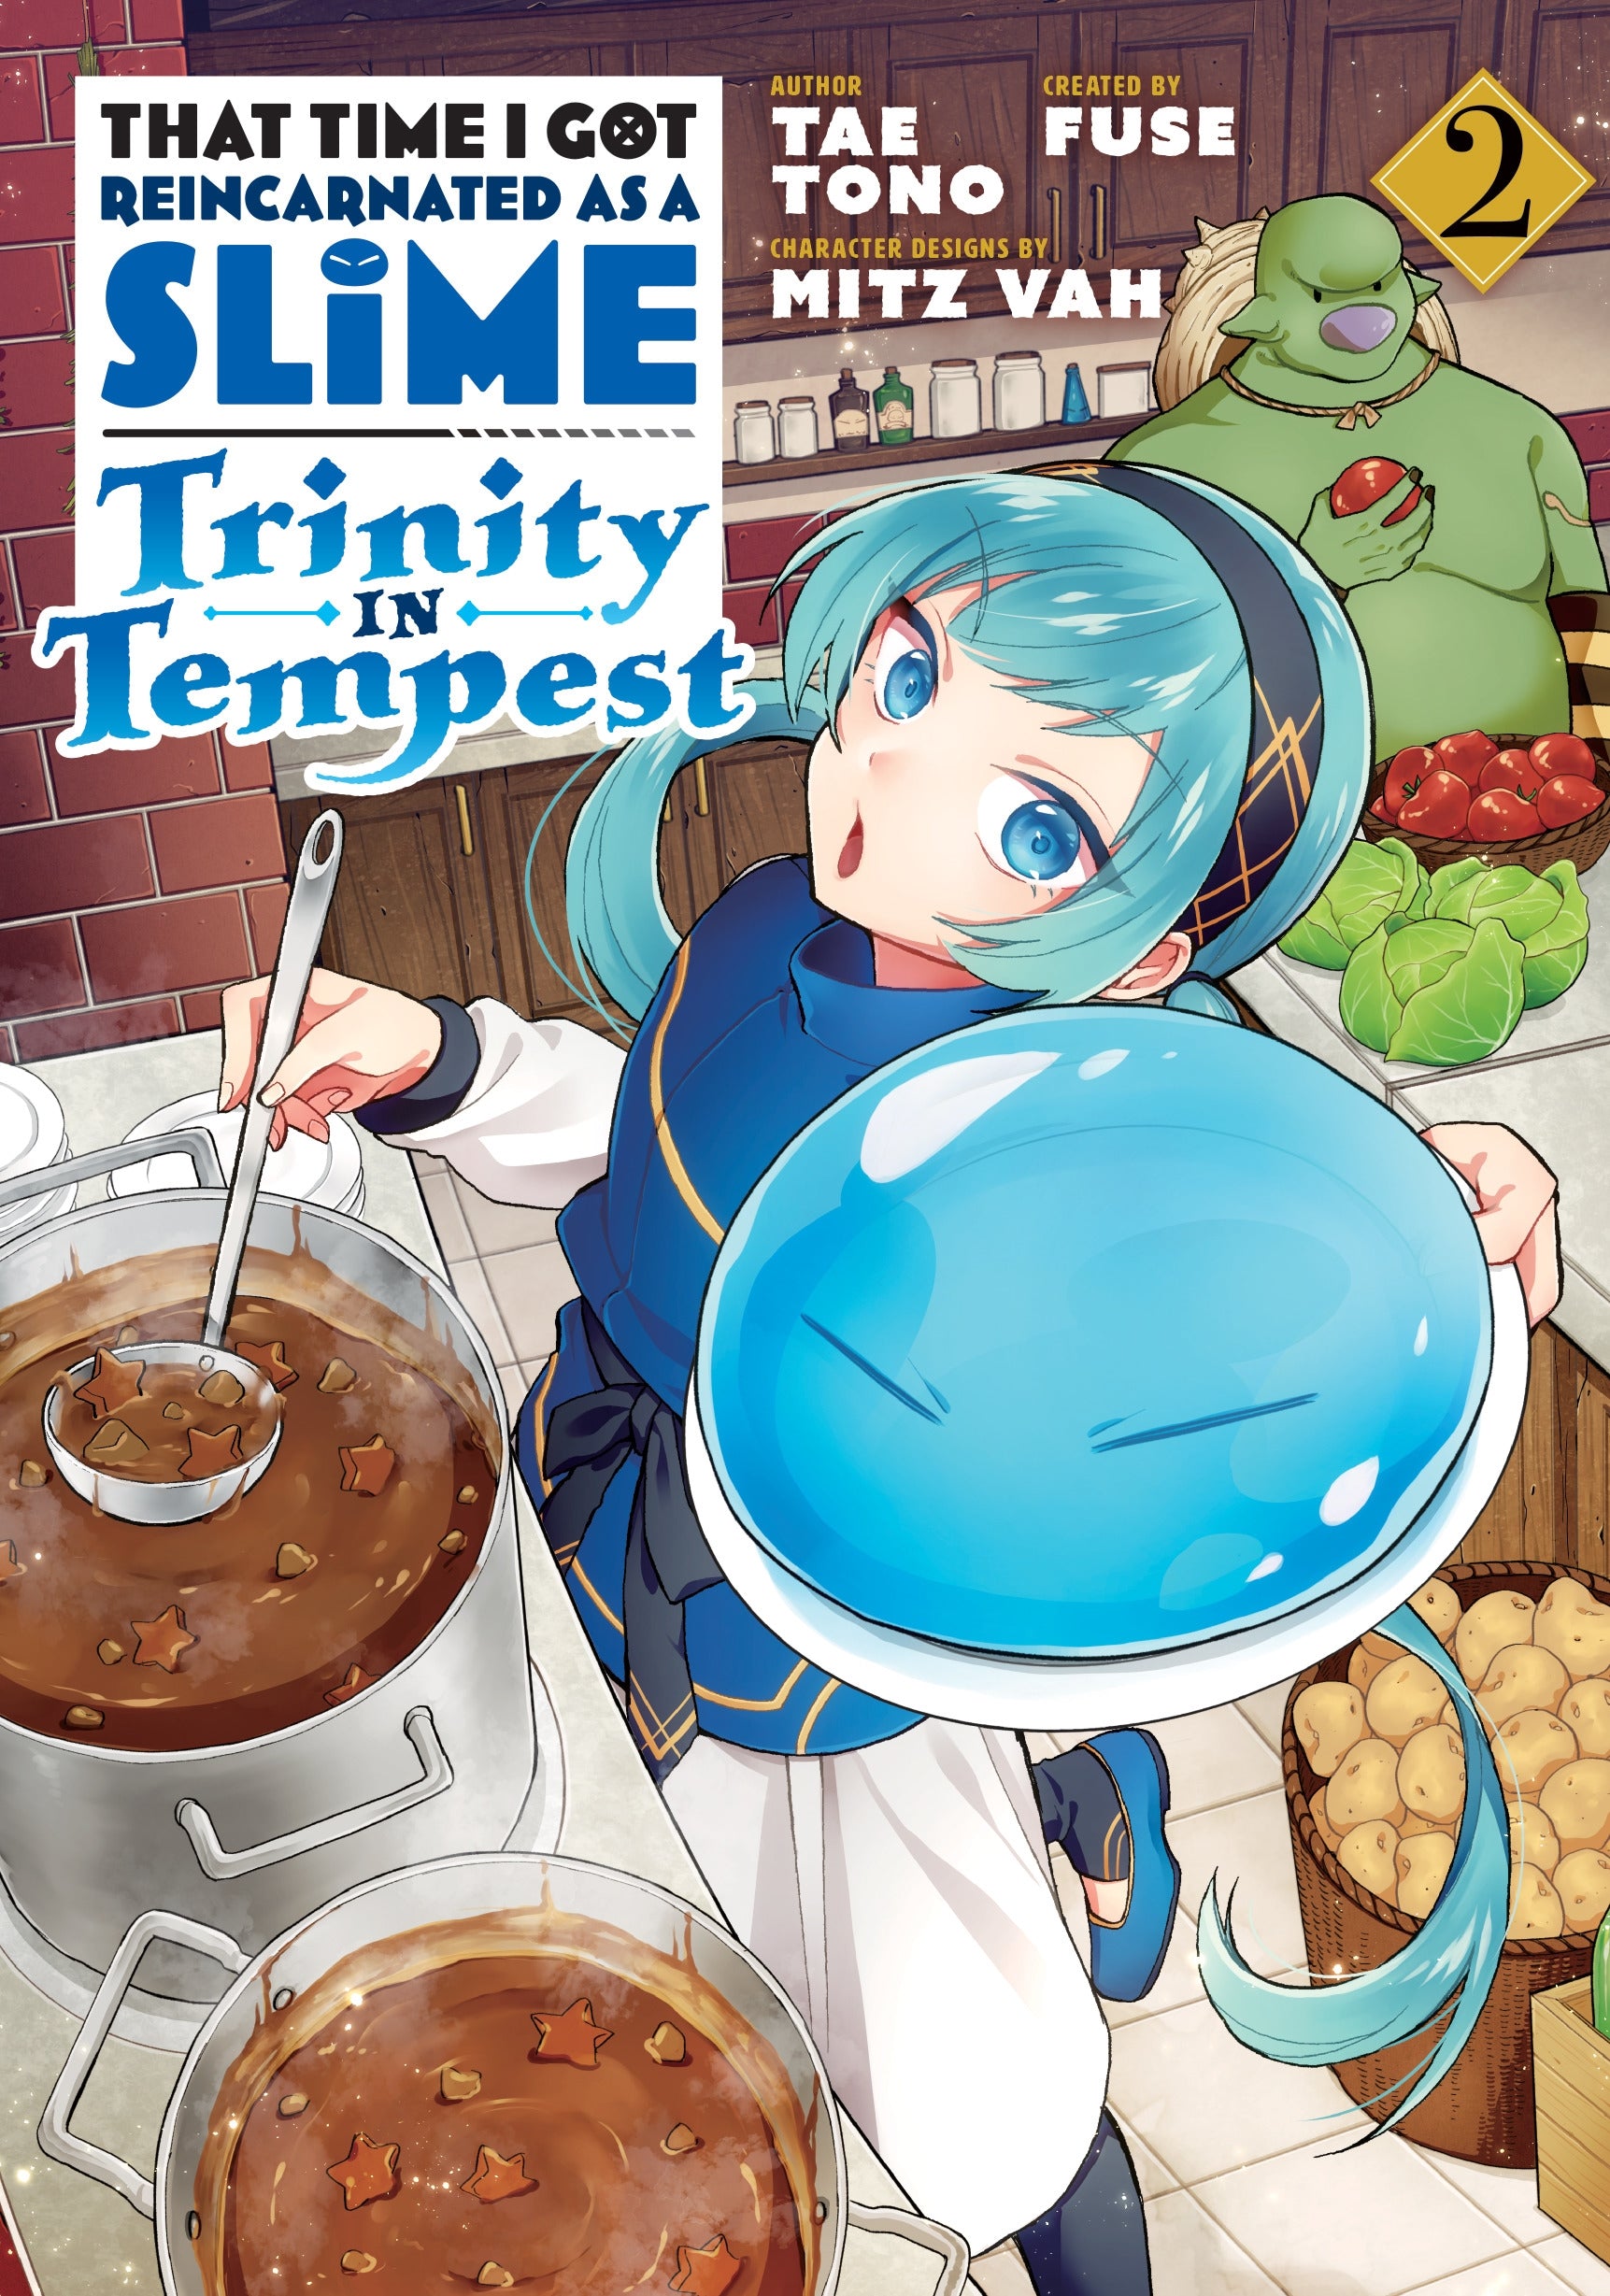 That Time I Got Reincarnated as a Slime Trinity in Tempest (Manga), Vol. 2